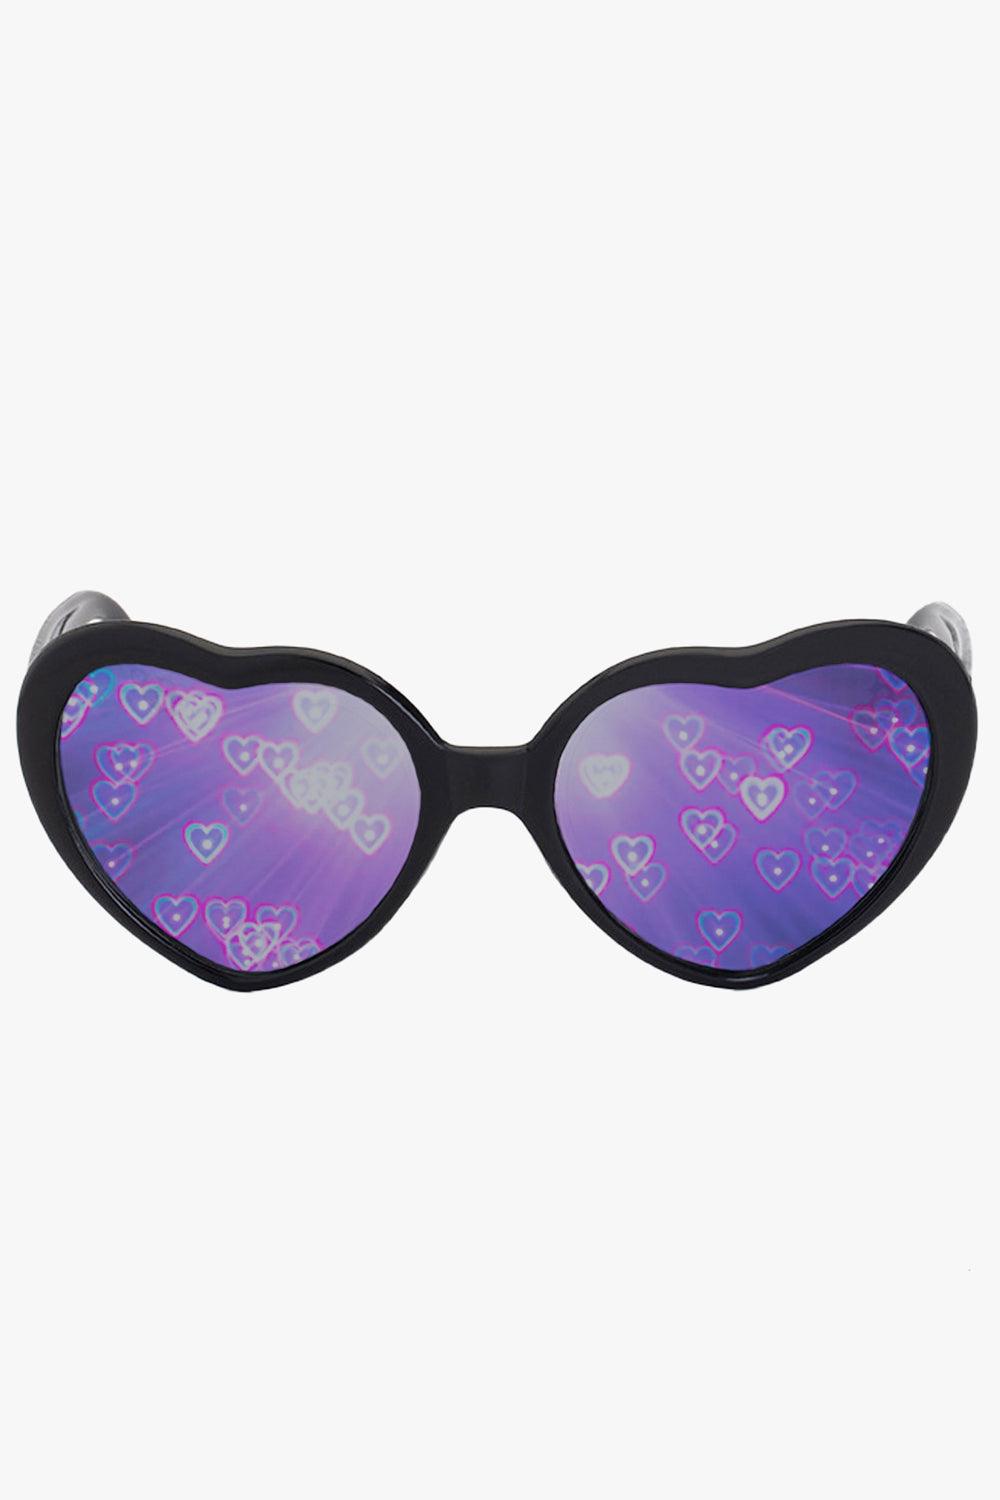 GloFX Heart Diffraction Glasses - Aesthetic Clothes Shop